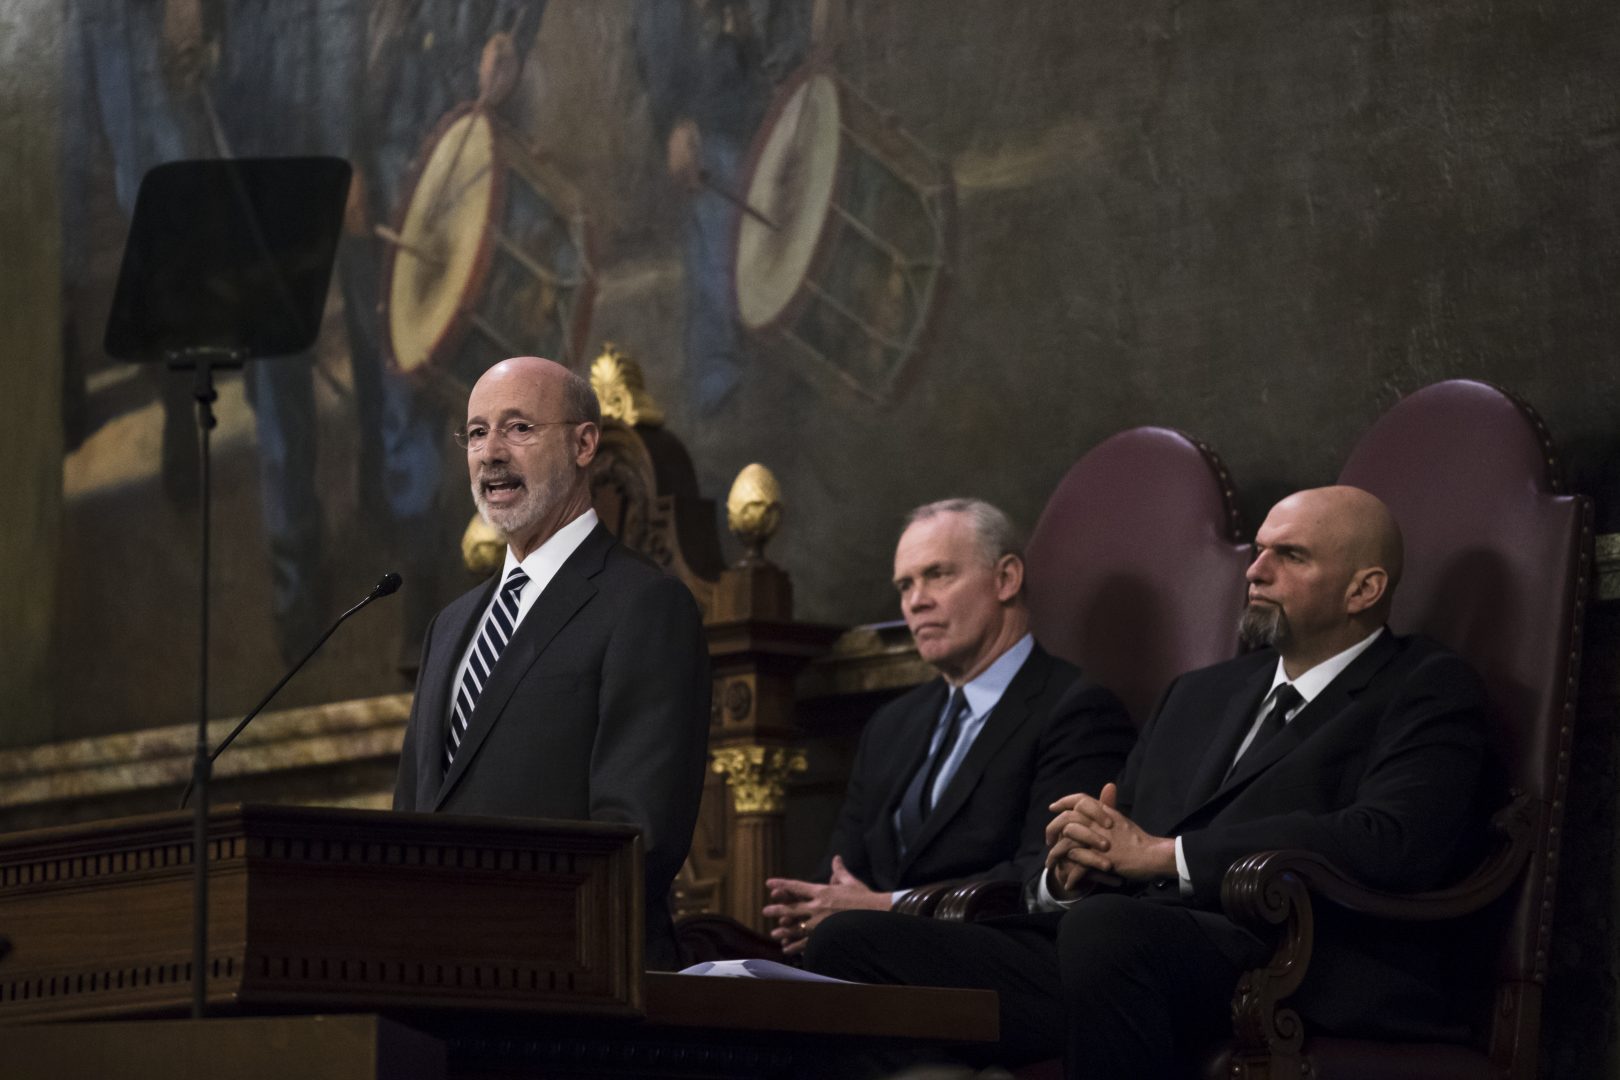 Democratic Gov. Tom Wolf, left, delivers his budget address for the 2019-20 fiscal year to a joint session of the Pennsylvania House and Senate in Harrisburg, Pa., Tuesday, Feb. 5, 2019. House Speaker Mike Turzai, R-Allegheny, is at the center, and Lt. Gov. John Fetterman is at the right.